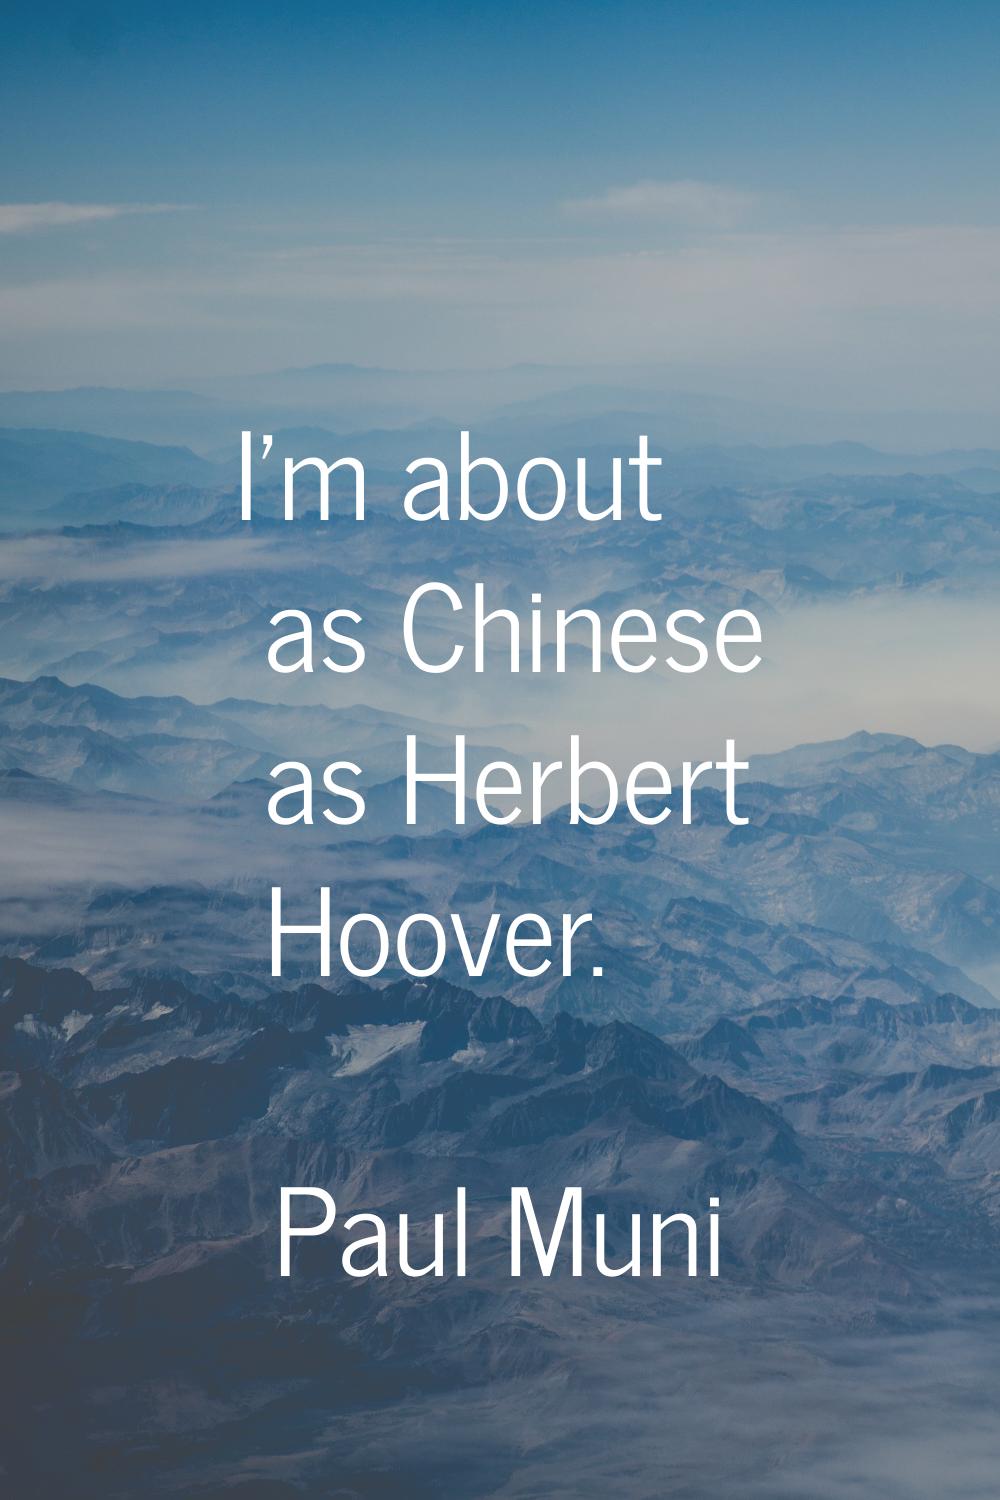 I'm about as Chinese as Herbert Hoover.